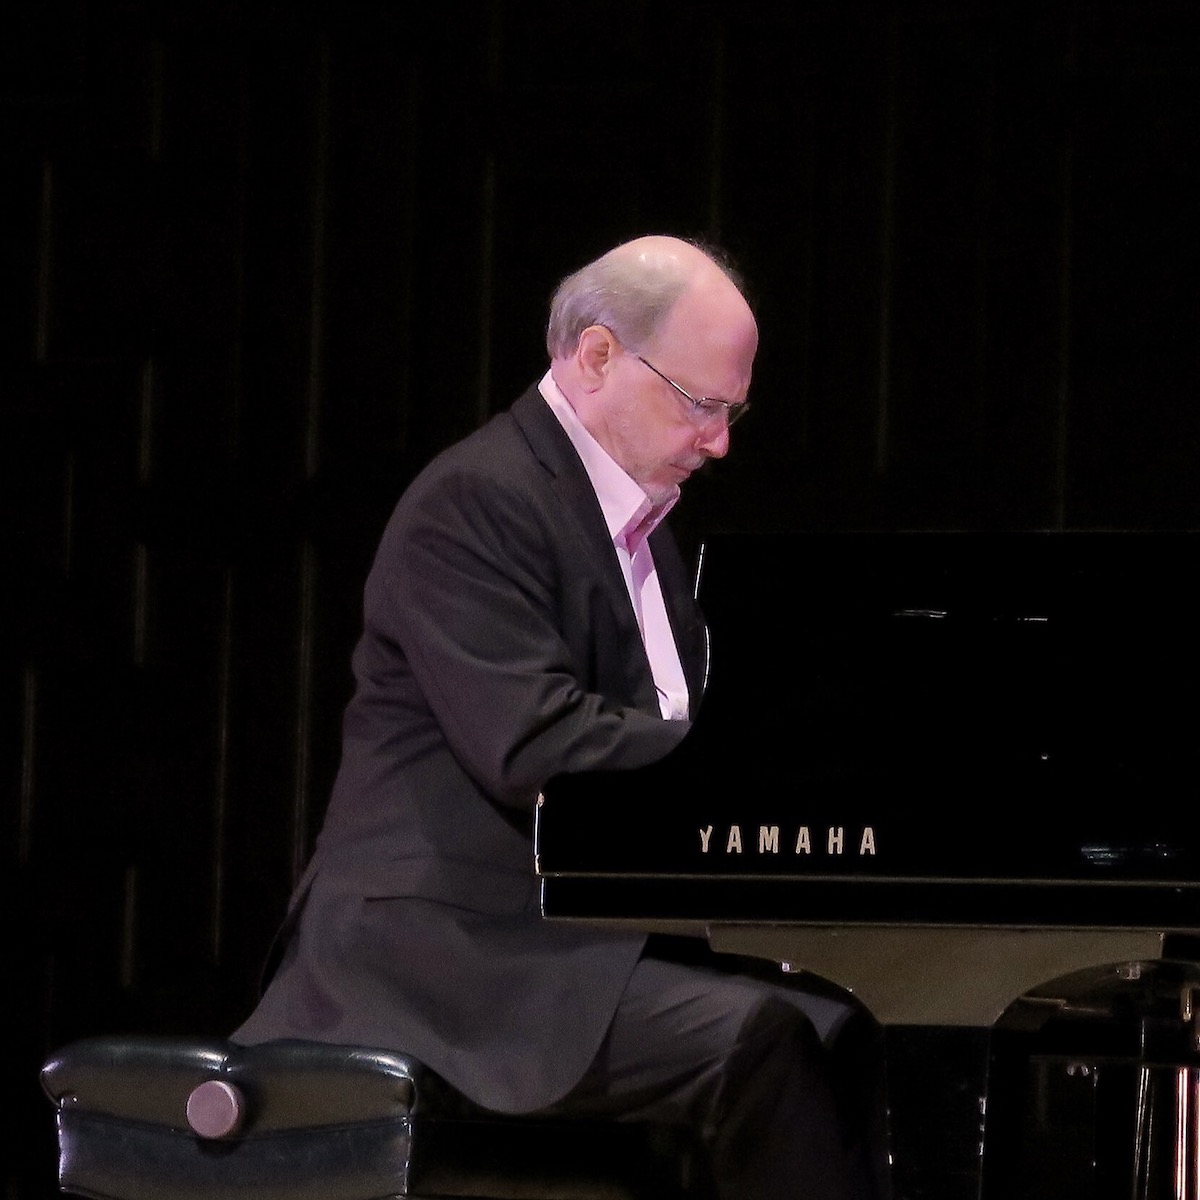 Marc-André Hamelin performing on a Yamaha grand piano.